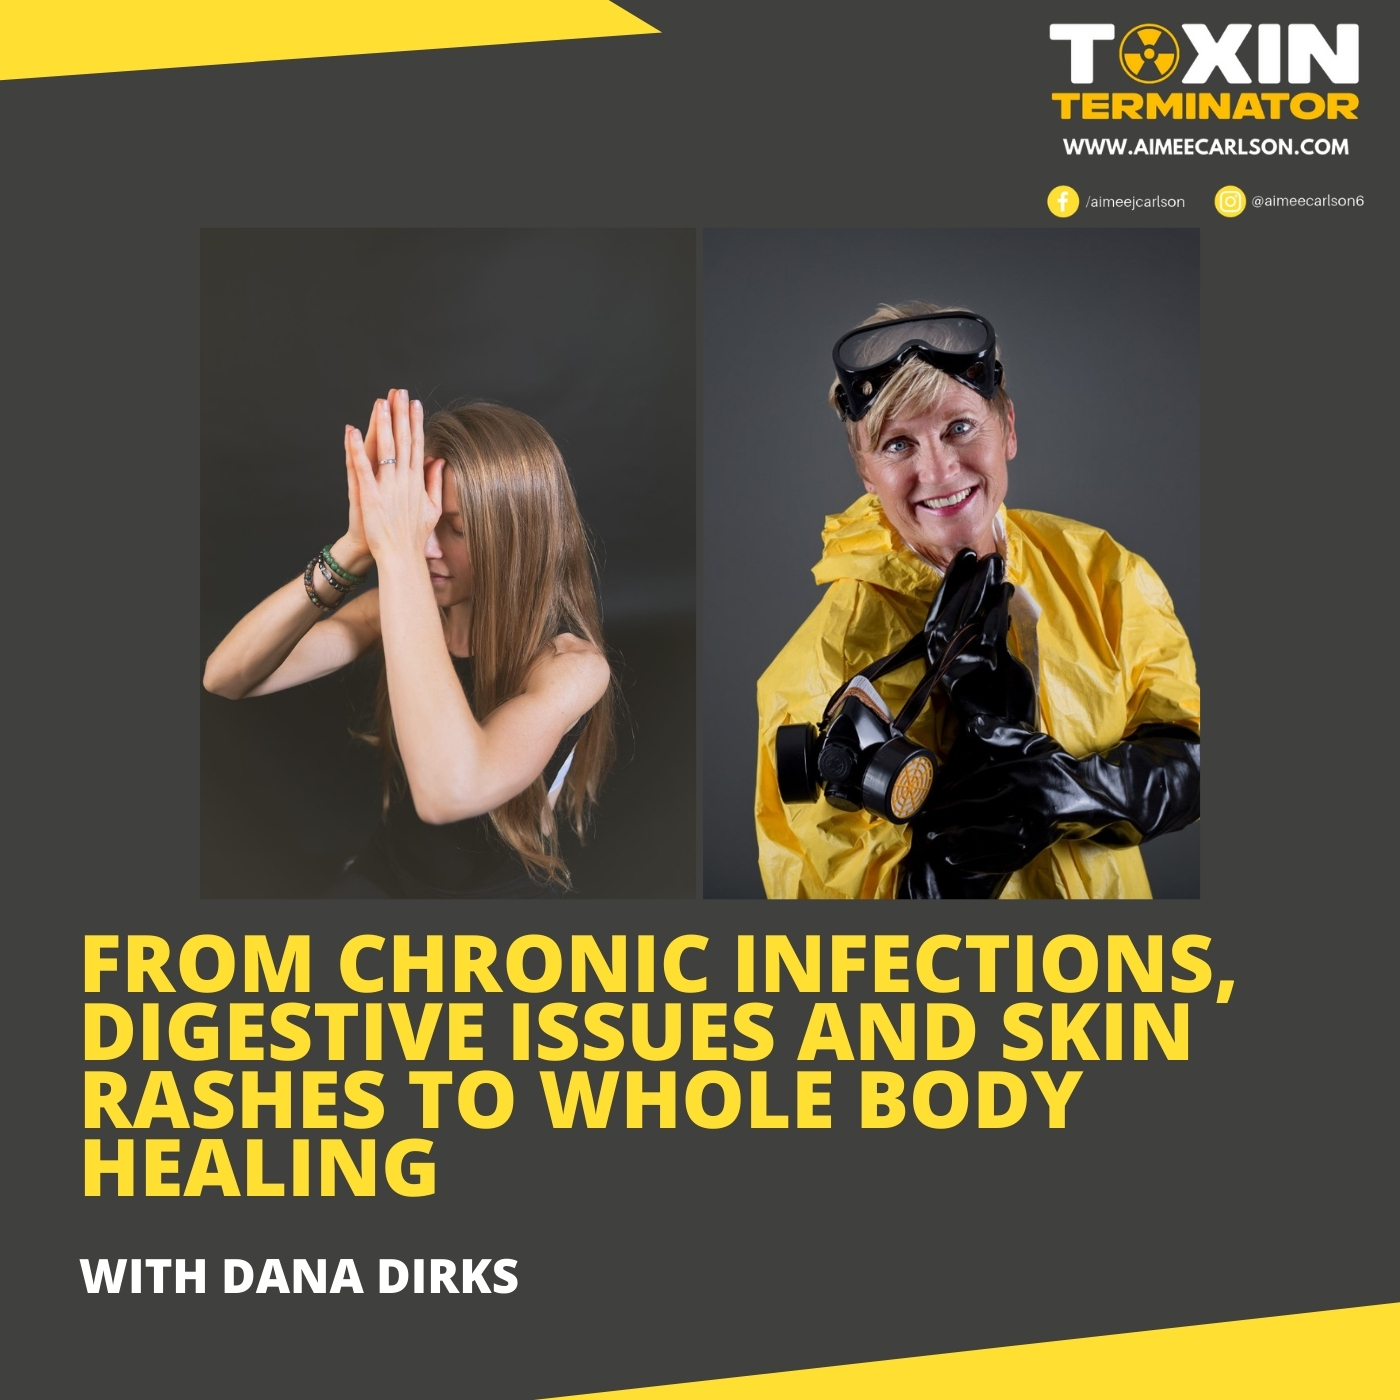 From Chronic Infections, Digestive Issues and Skin Rashes To Whole Body Healing with Dana Dirks